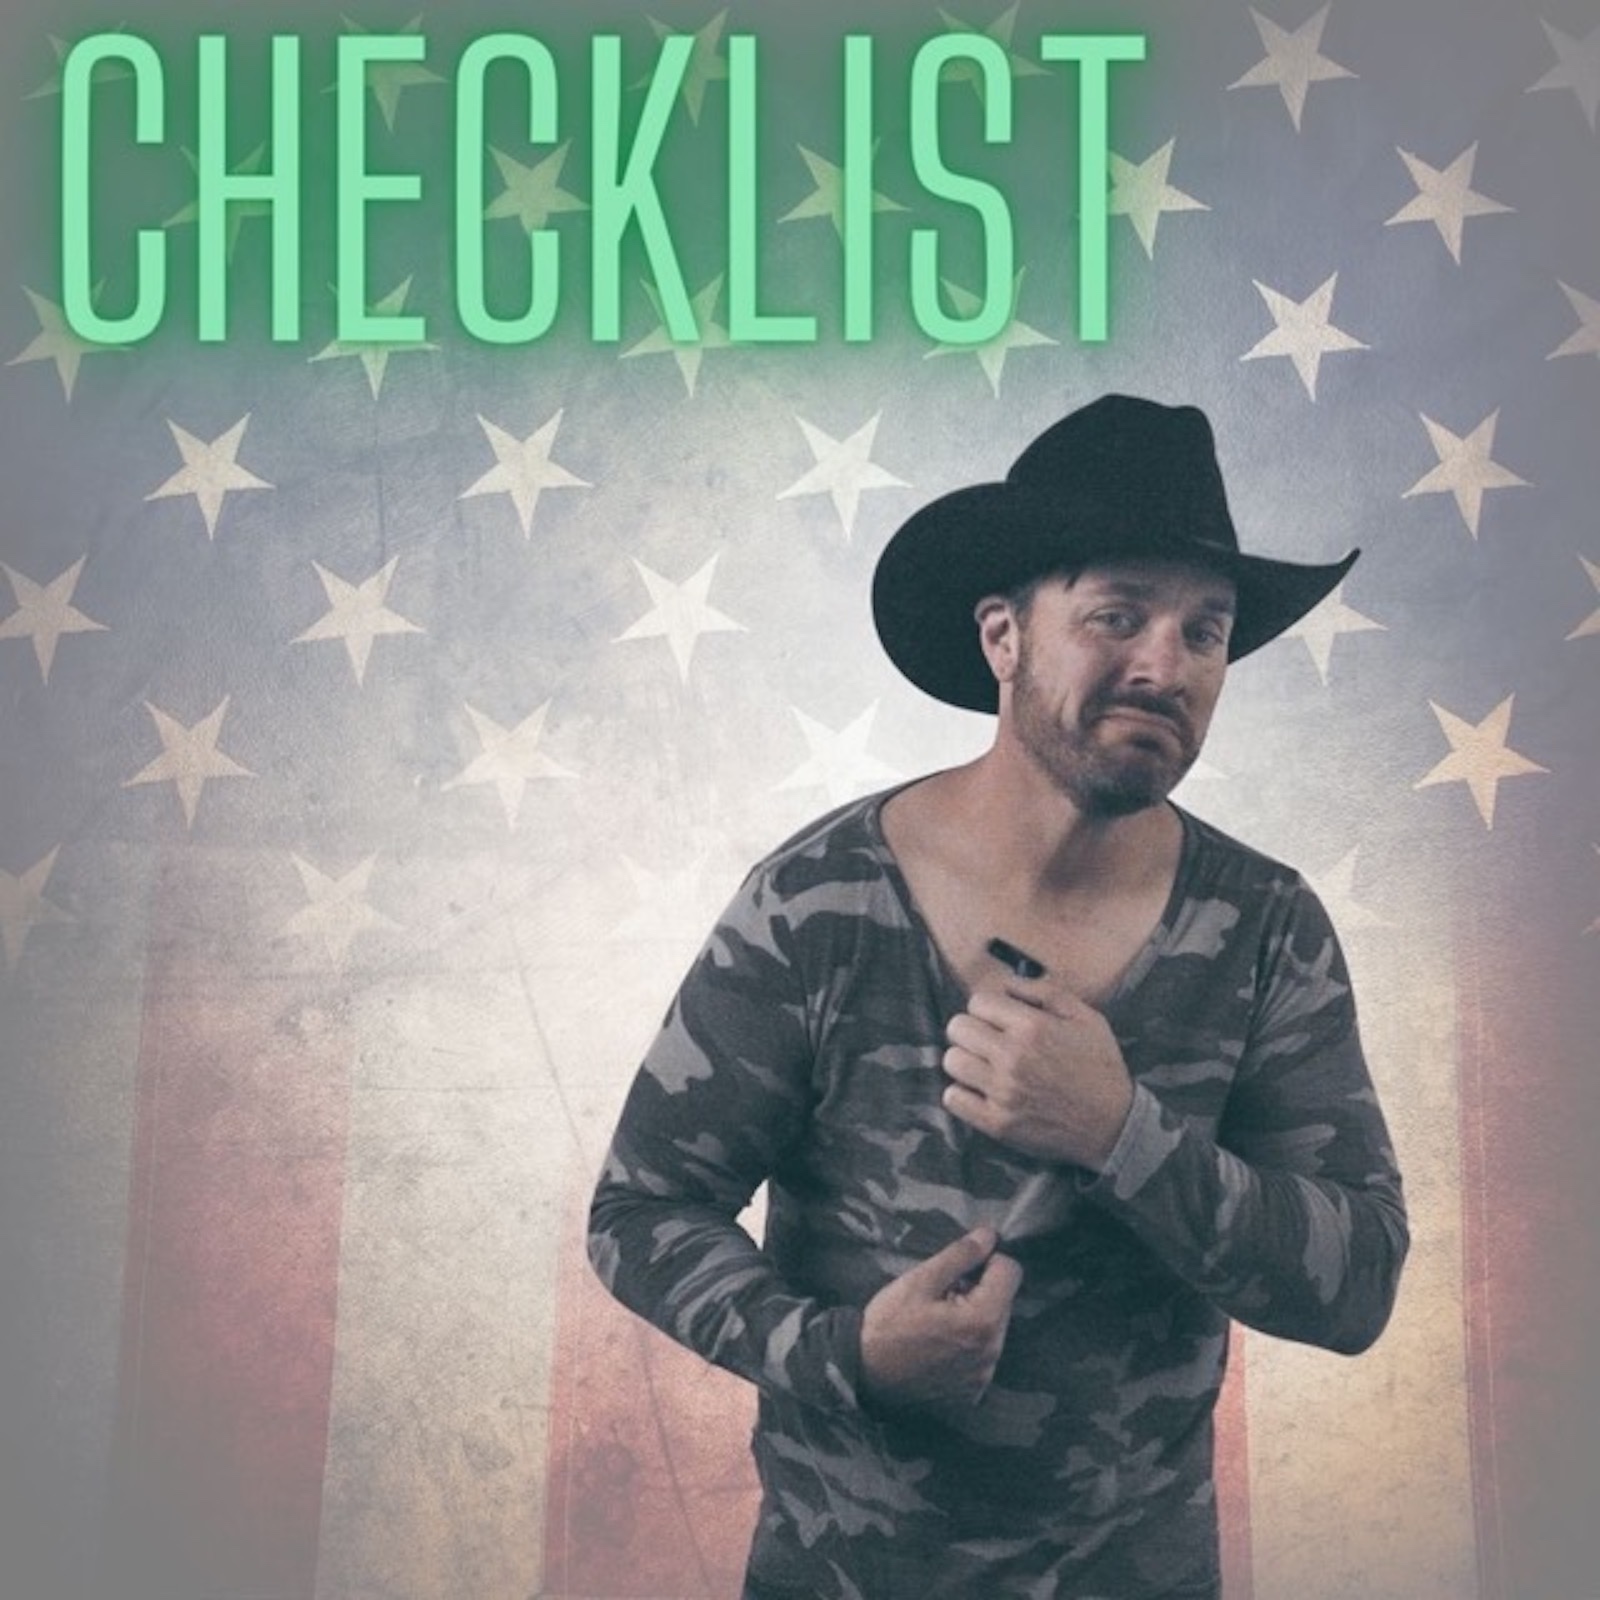 Proficiently Woven And Thoroughly Entertaining - Will Thompson Stands Apart With Playful Country Parody "Checklist"